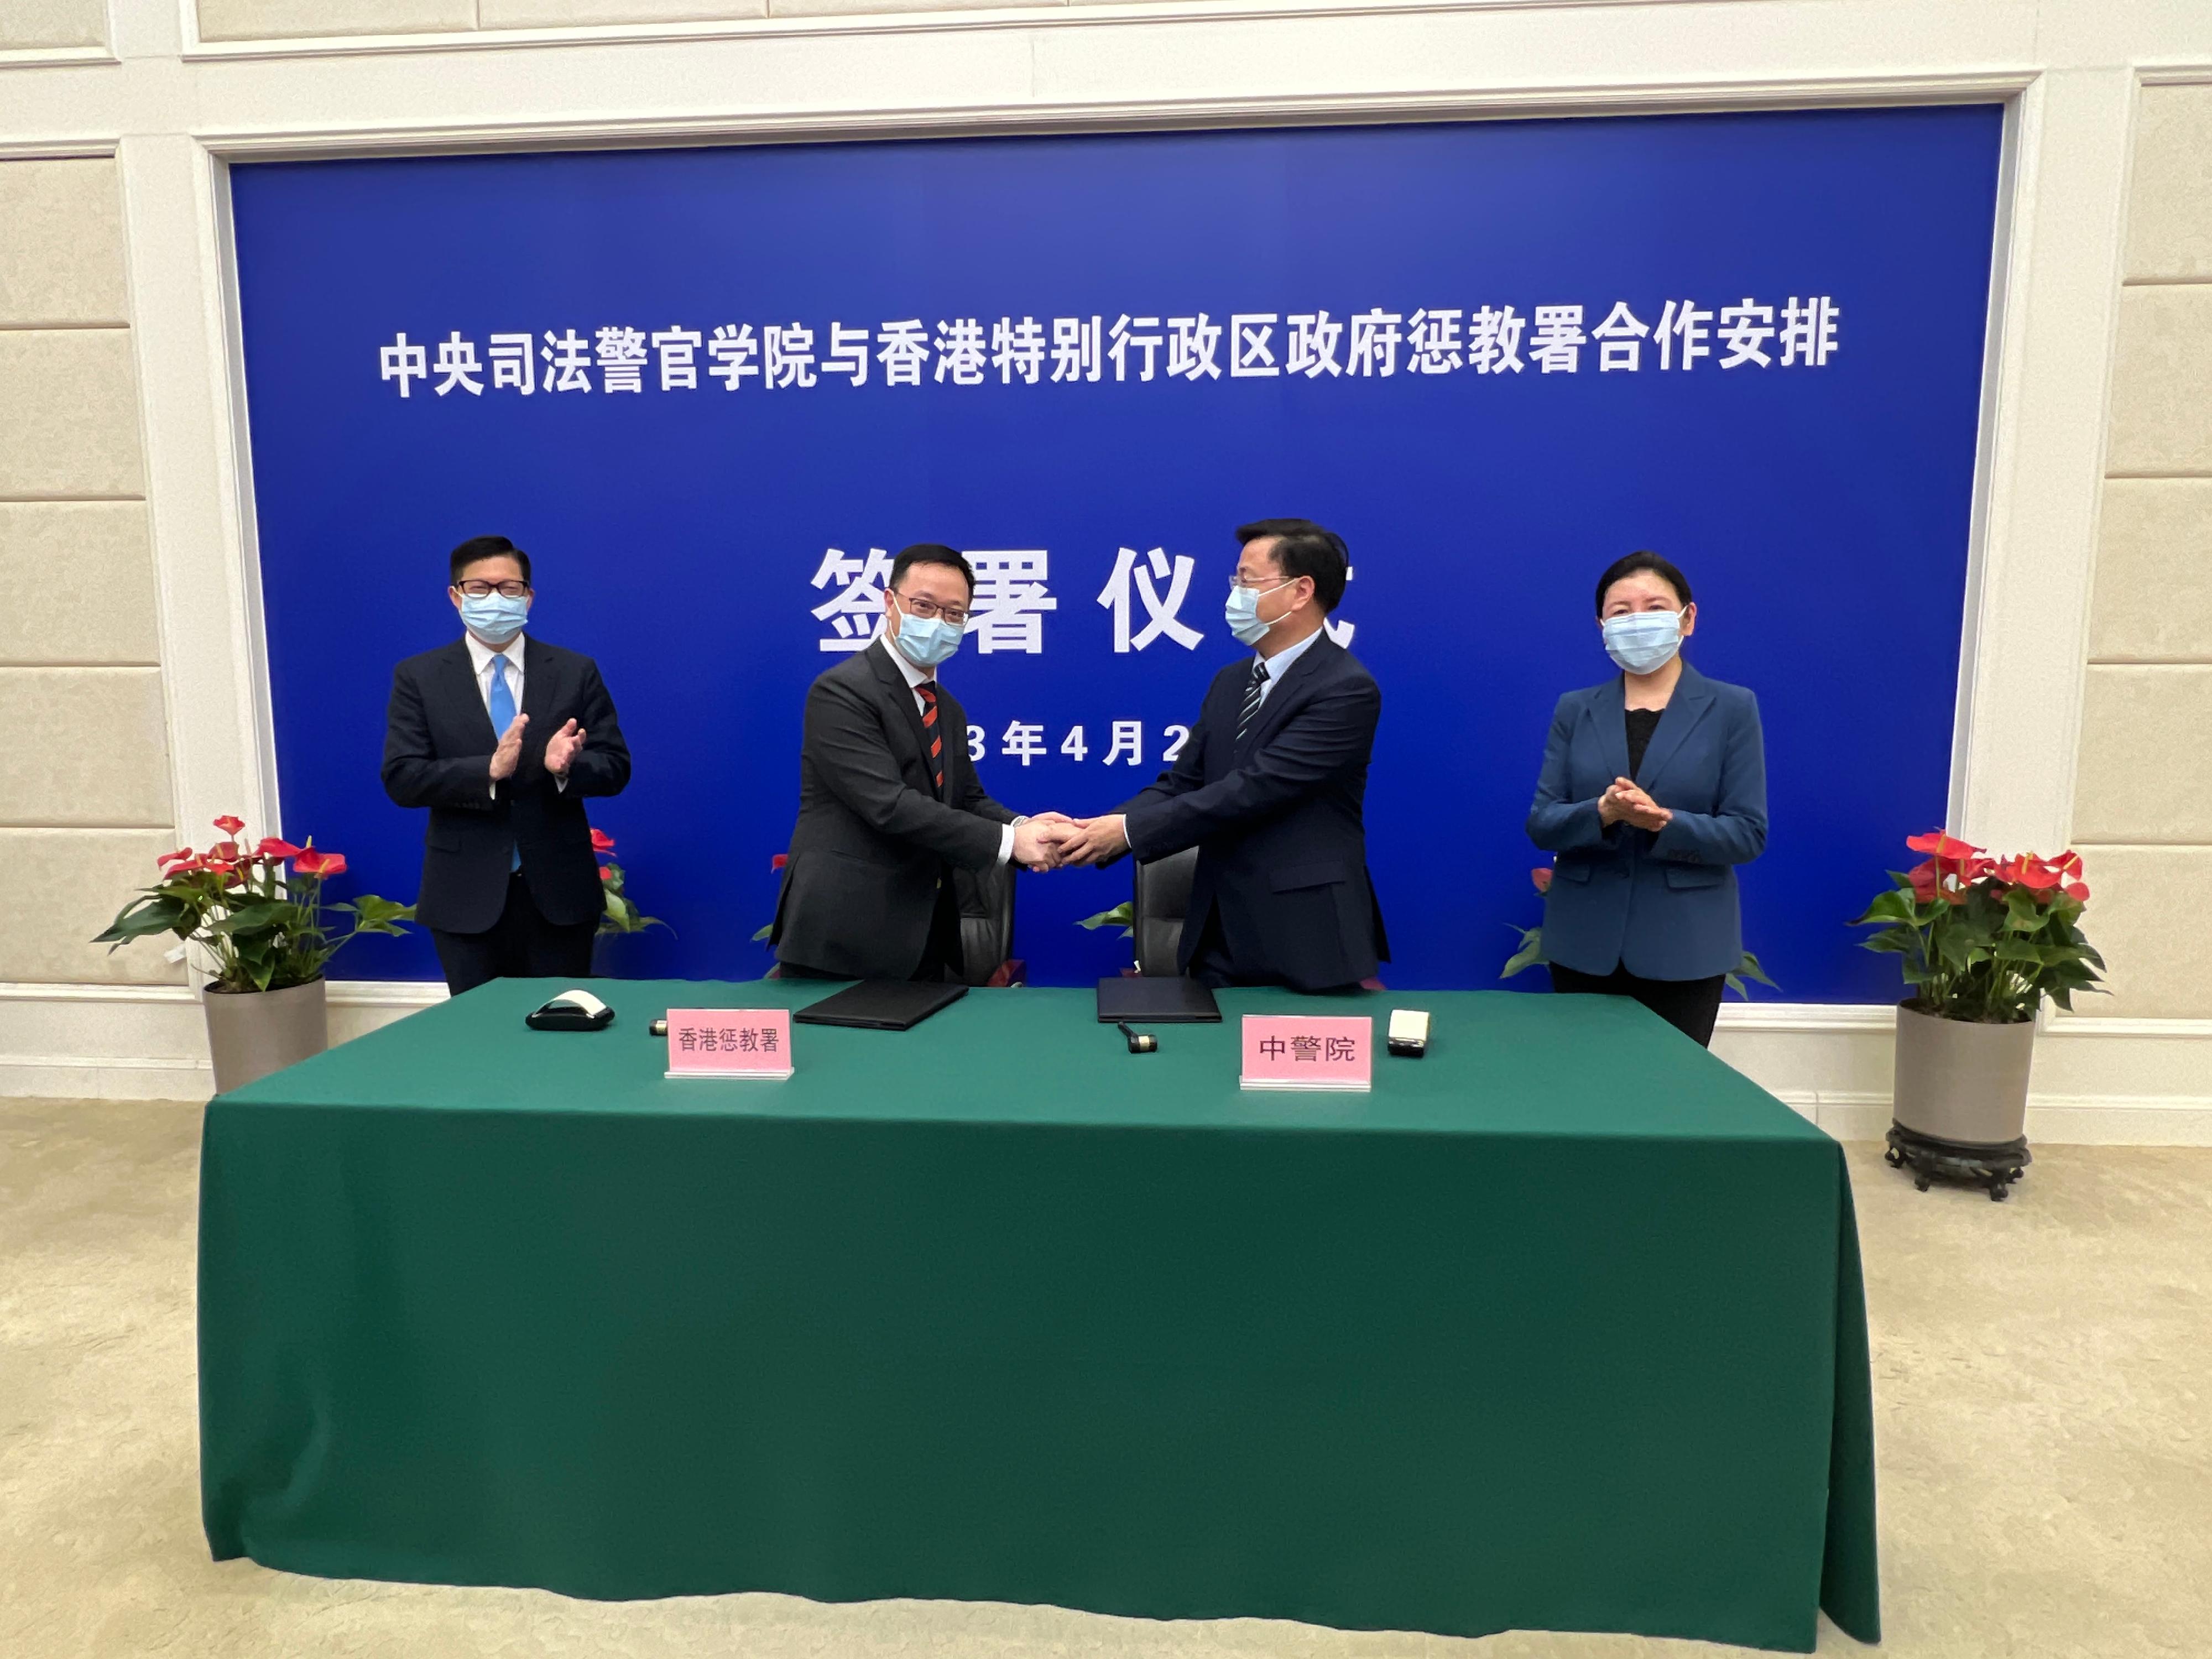 The Secretary for Security, Mr Tang Ping-keung, conducted the third day of his visit to Beijing today (April 26). Photo shows Mr Tang (first left) and the Minister of Justice, Ms He Rong (first right), witnessing the signing of a new co-operation agreement between the Commissioner of Correctional Services, Mr Wong Kwok-hing (second left), and the President of the National Police University for Criminal Justice, Mr Zhang Enyou (second right).